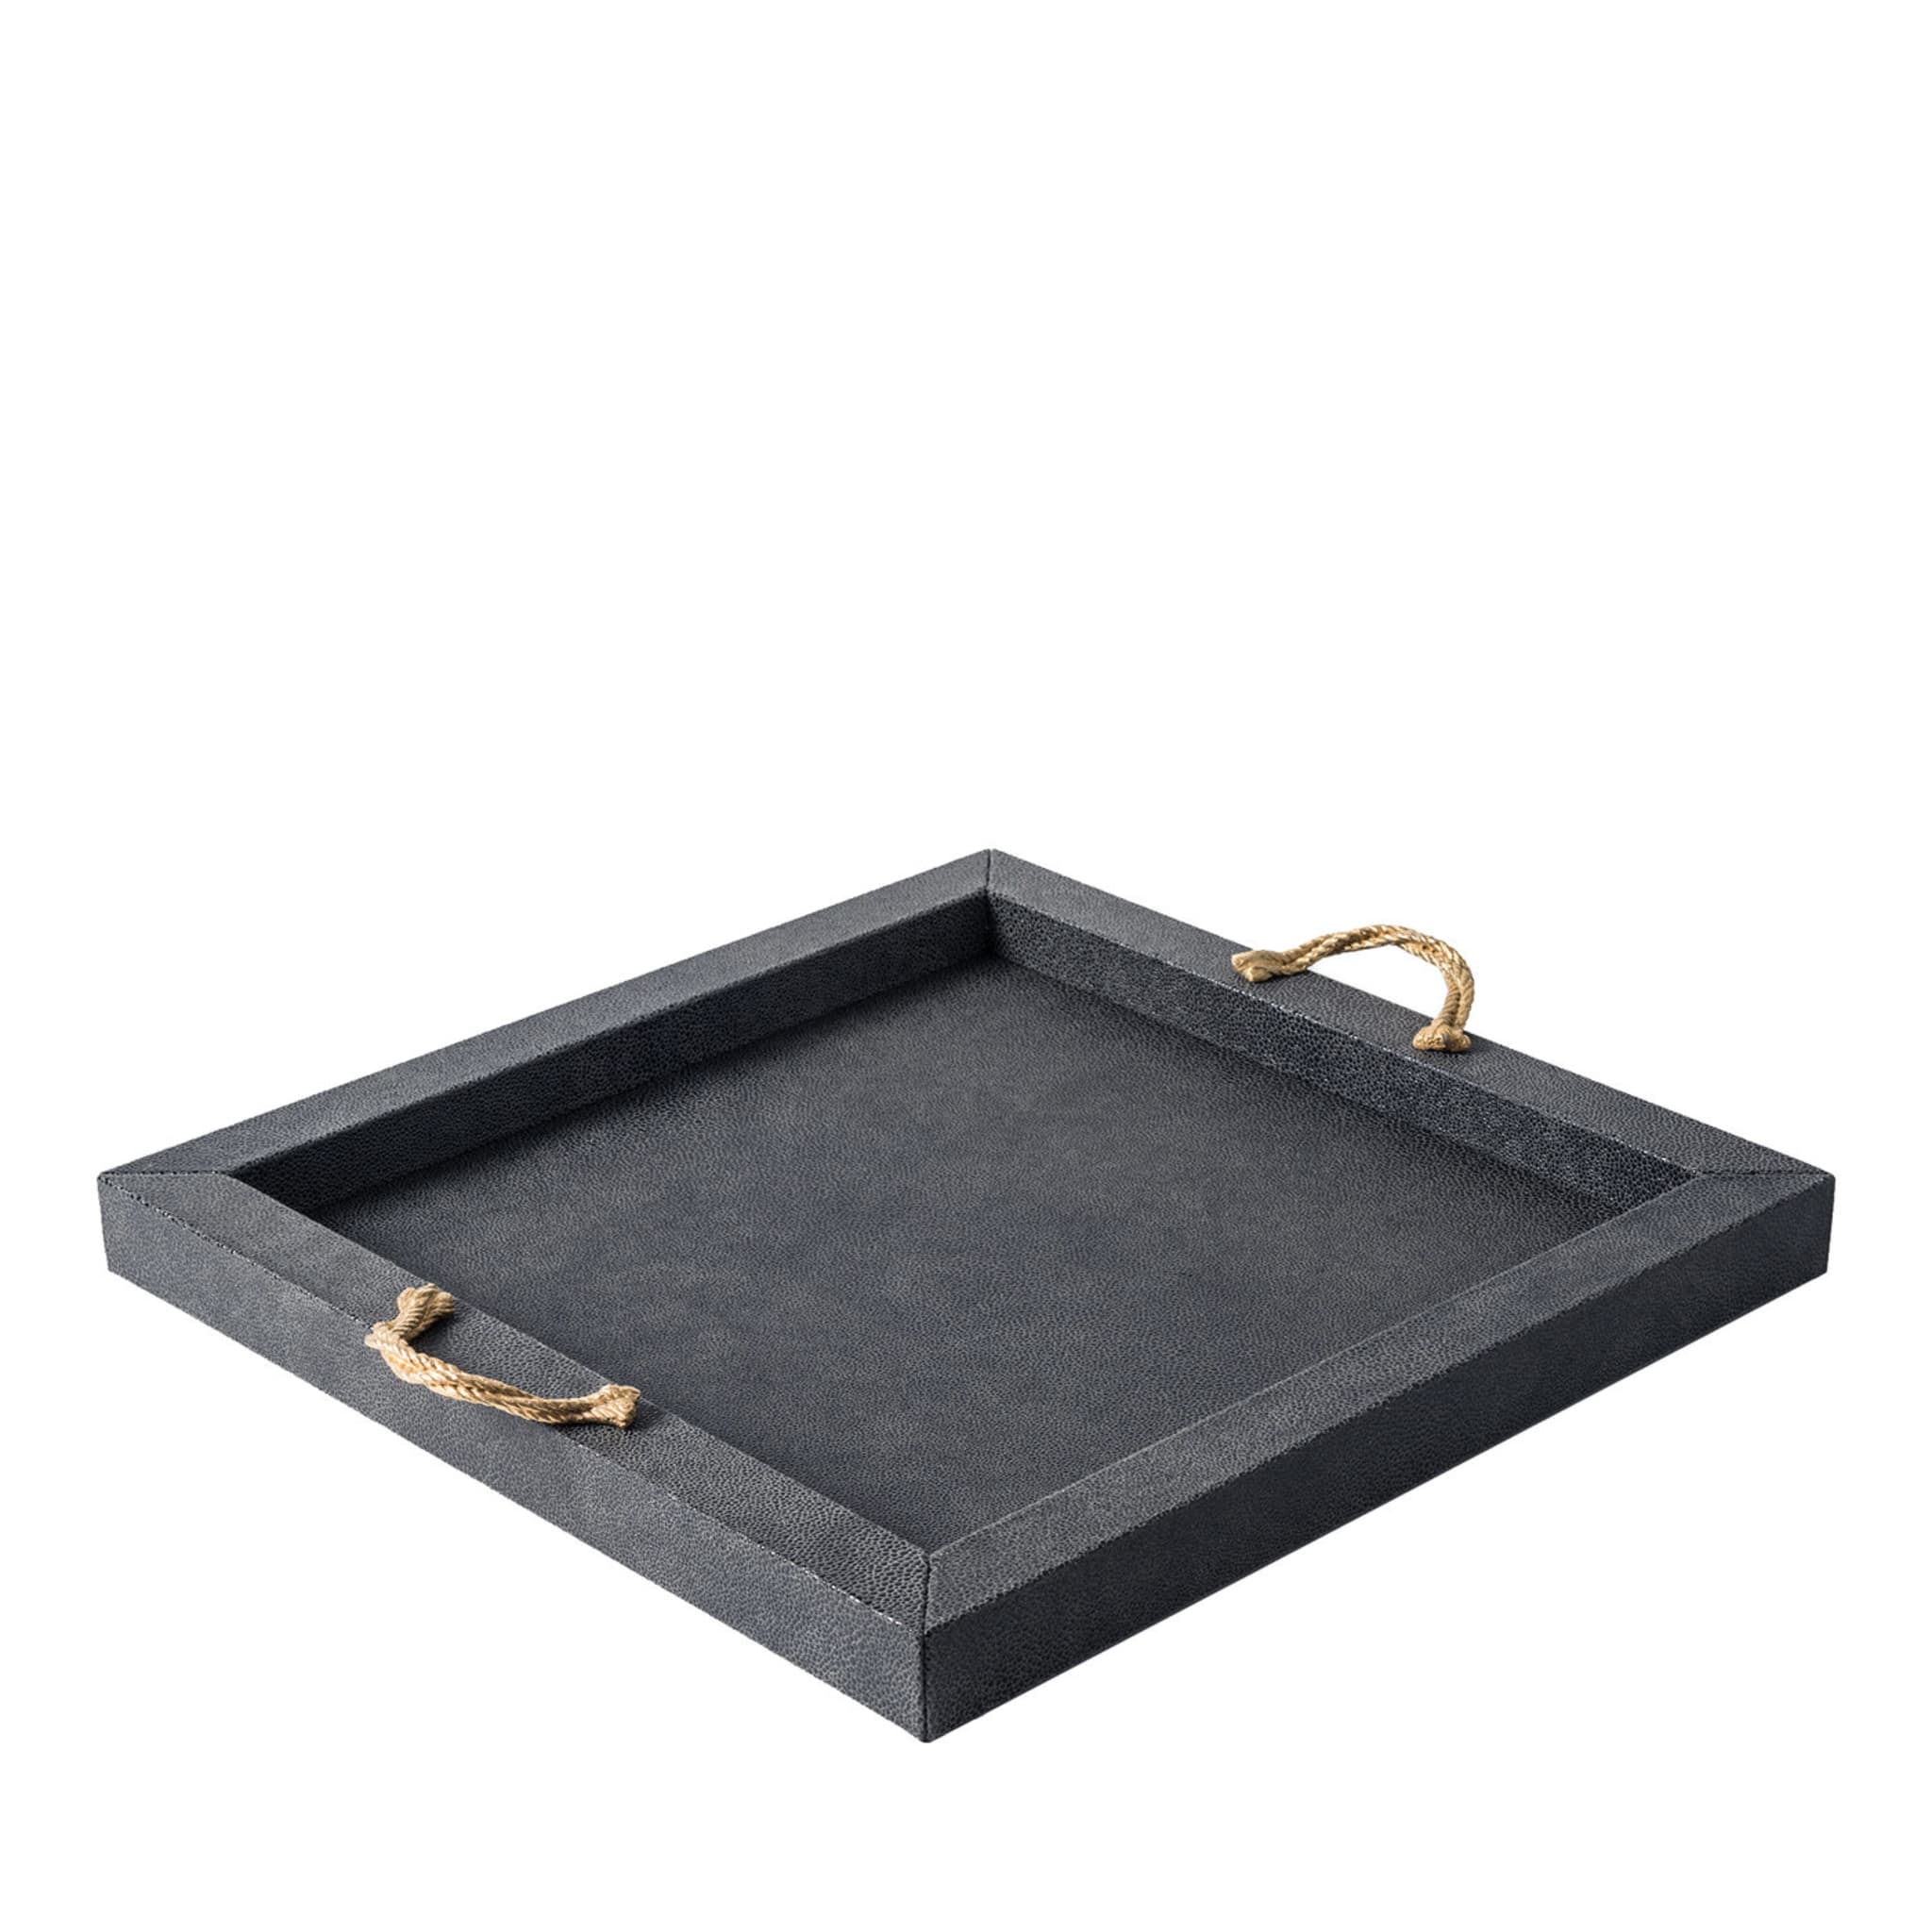 Thalia Black Square Tray with 24K Gold - Main view